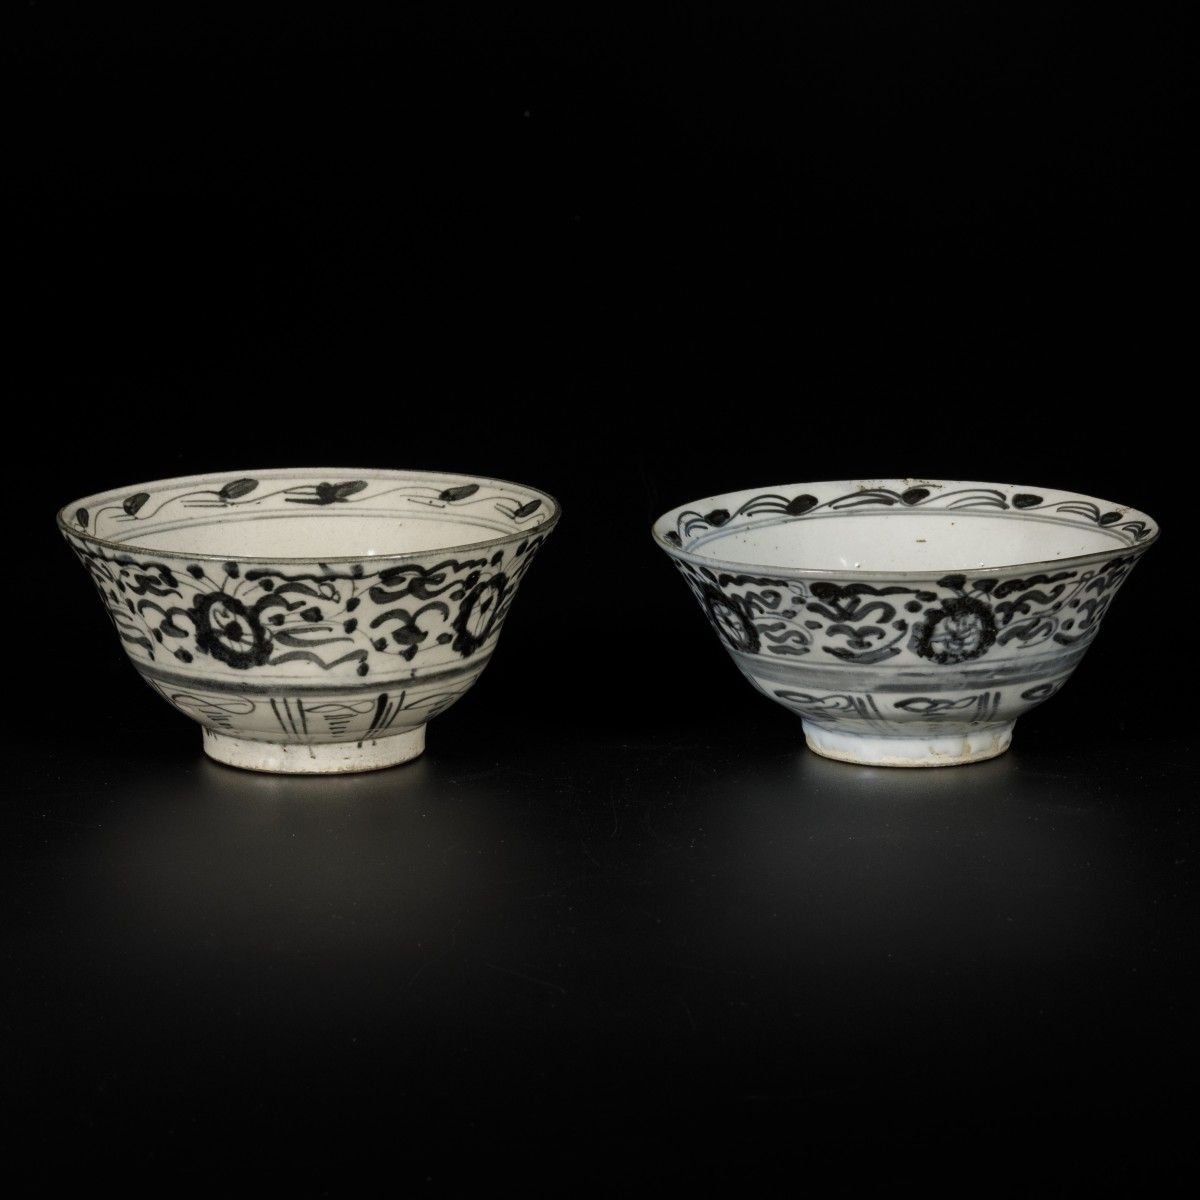 A lot of (2) Swatow bowls, China, 19th century. Diam. 16 cm. Estimation : 50 - 1&hellip;